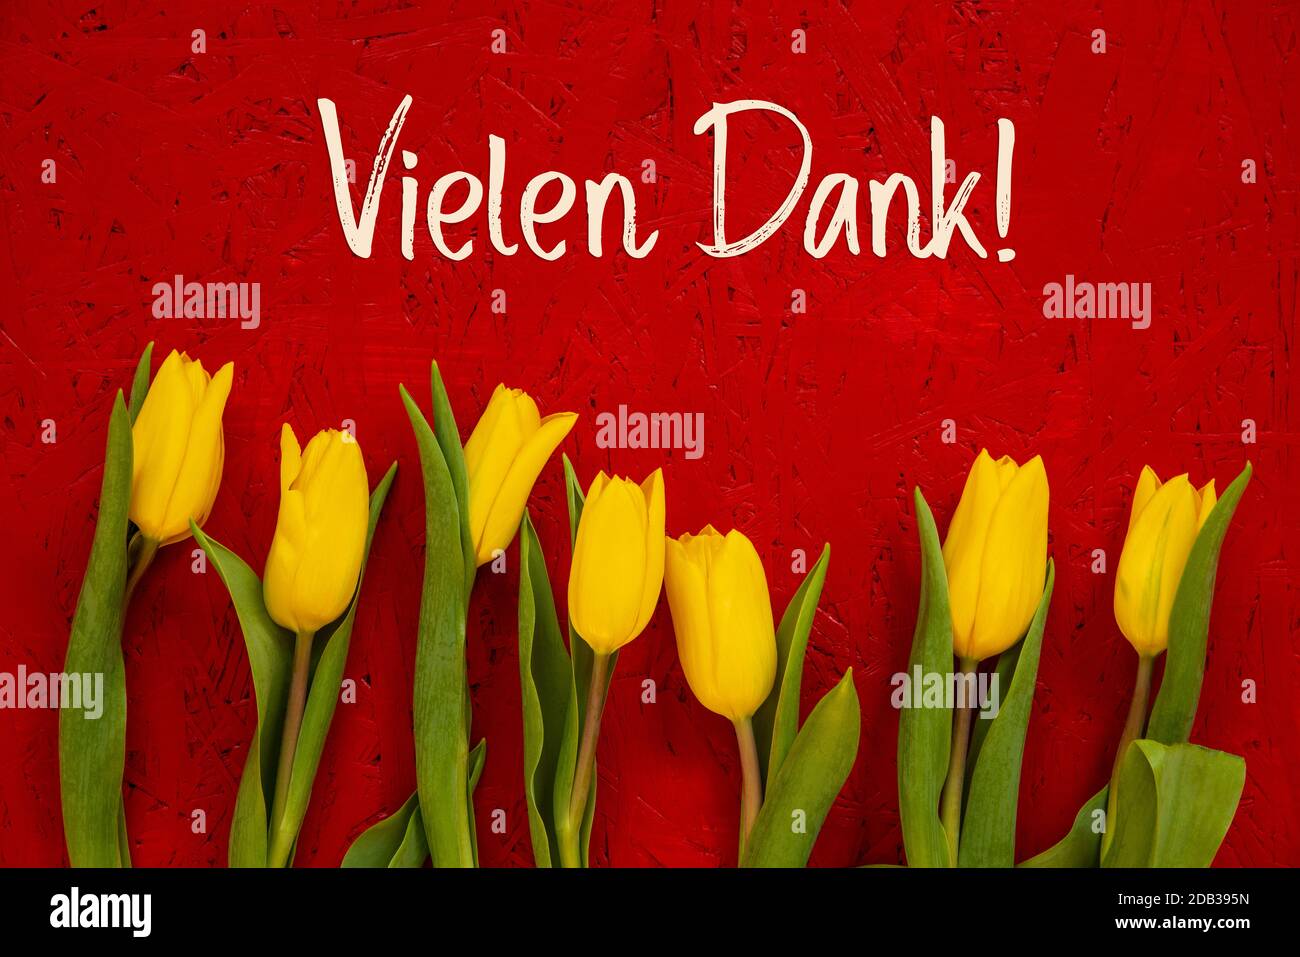 Red Wooden Background With German Text Vielen Dank Means Thank You. Yellow Tulip Flowers In Spring Season Stock Photo